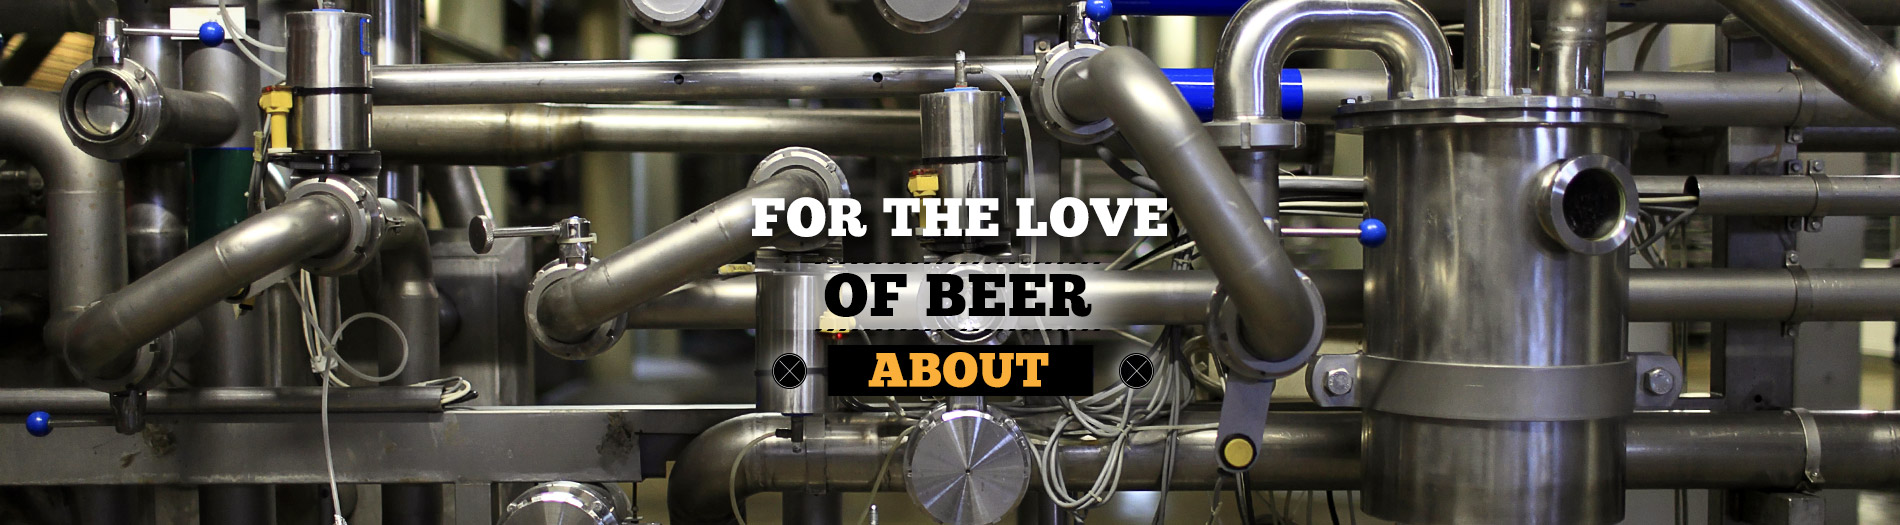 For the love of beer - About